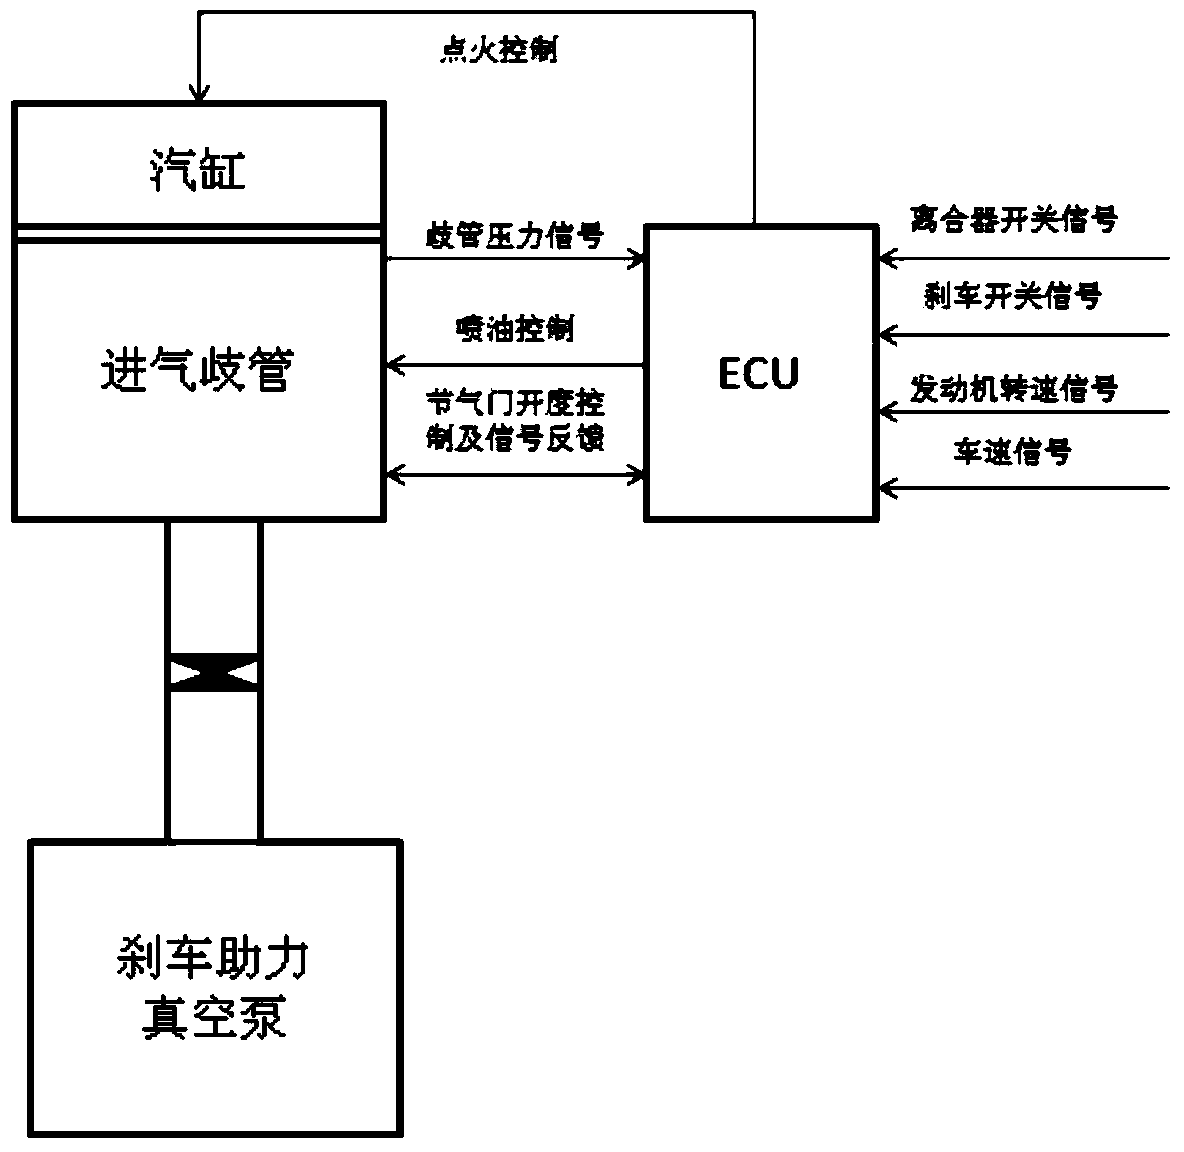 Brake power-assisted system based on ECU (electric control unit) auxiliary control and control method of brake power-assisted system